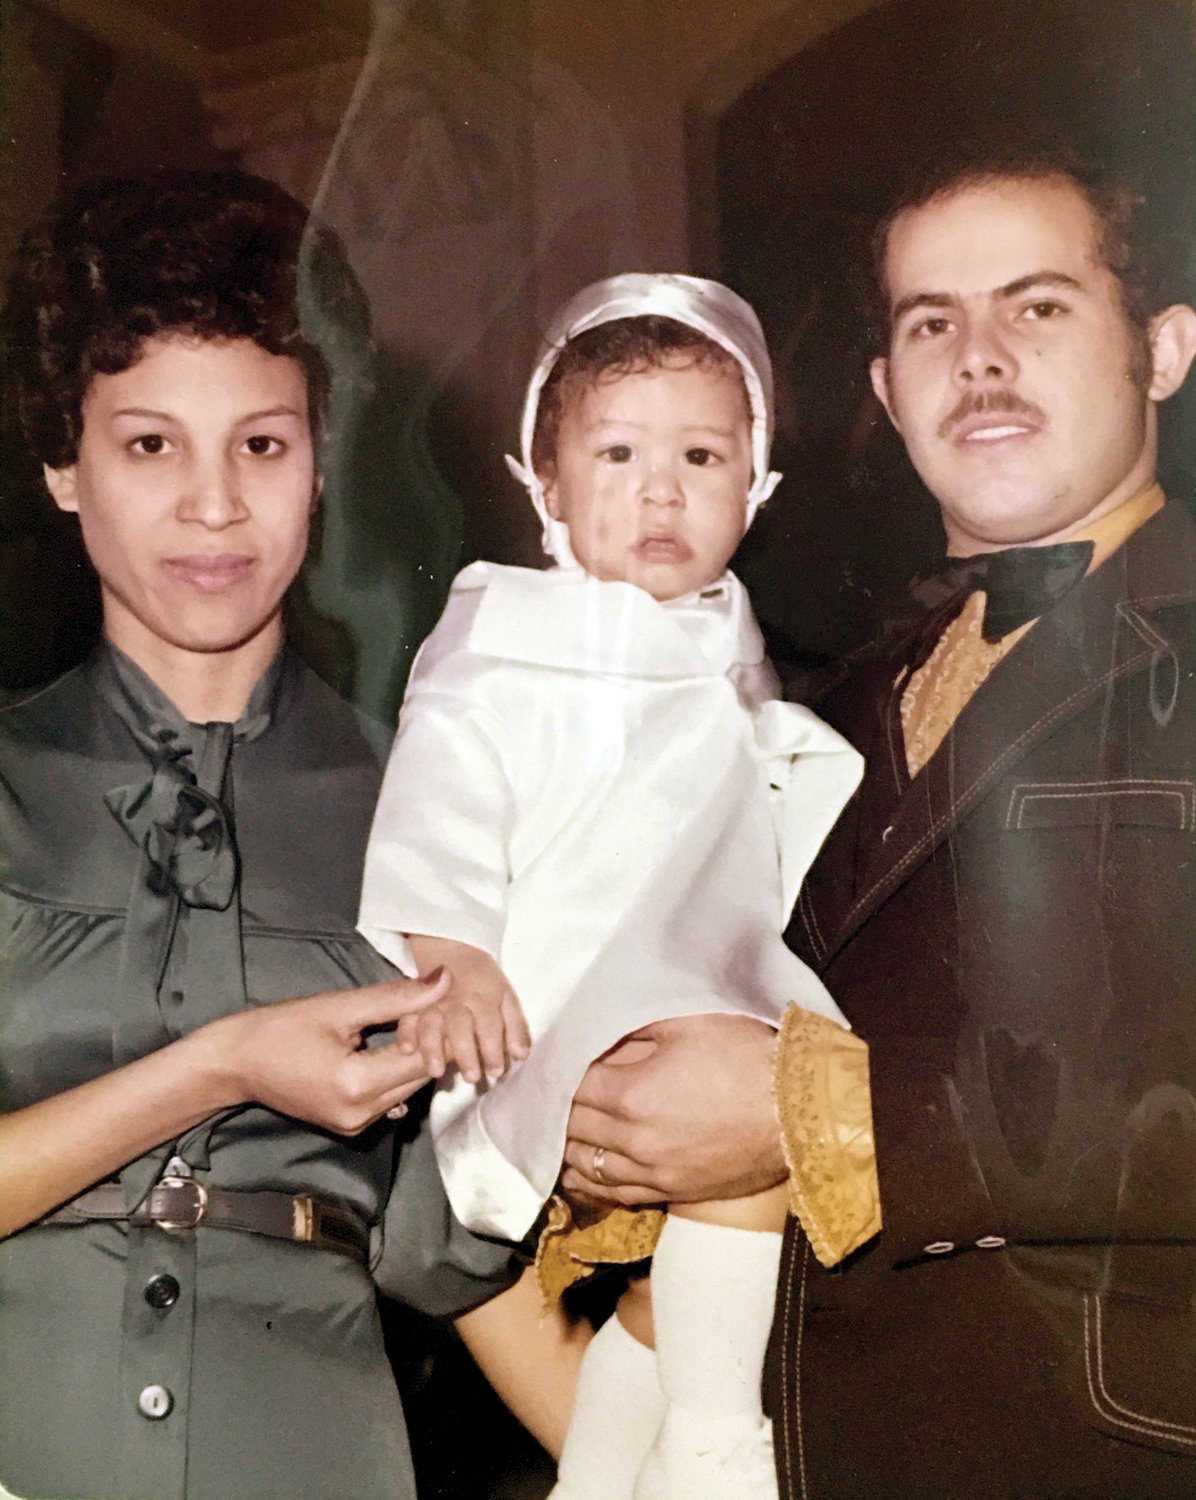 His parents Jose and Mercedes hold their young son after his baptism.